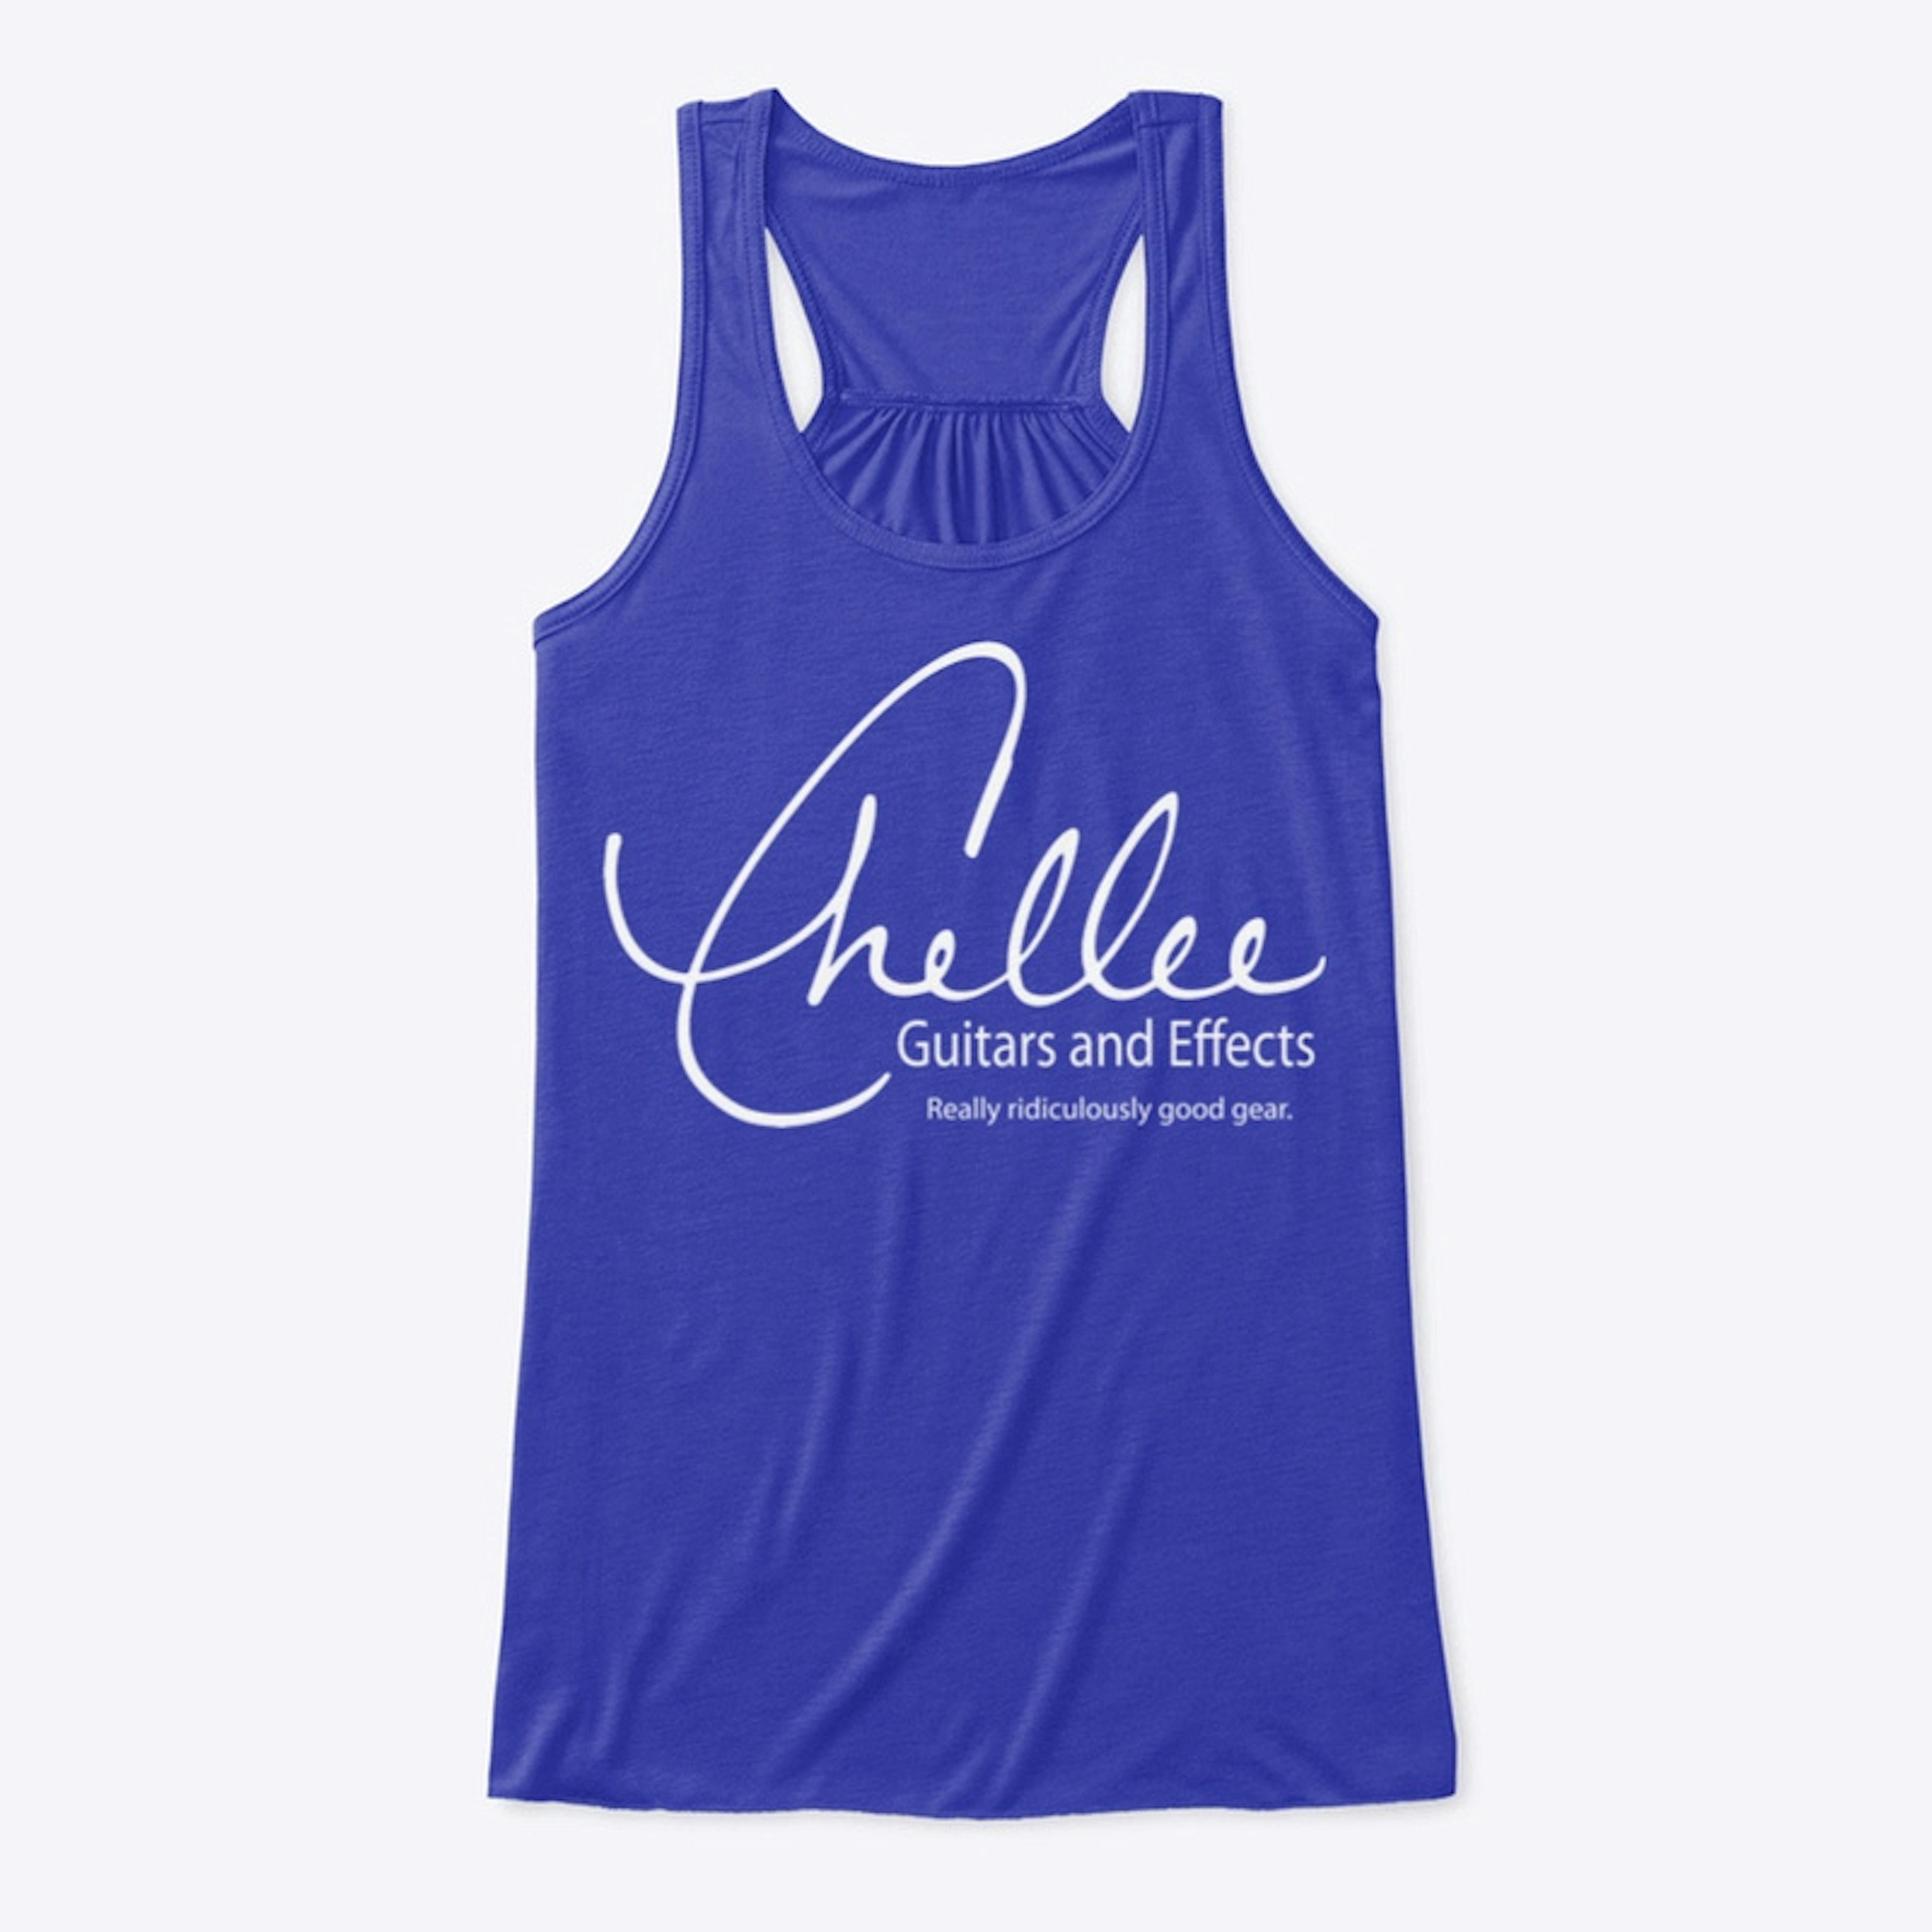 2021 Chellee Collection